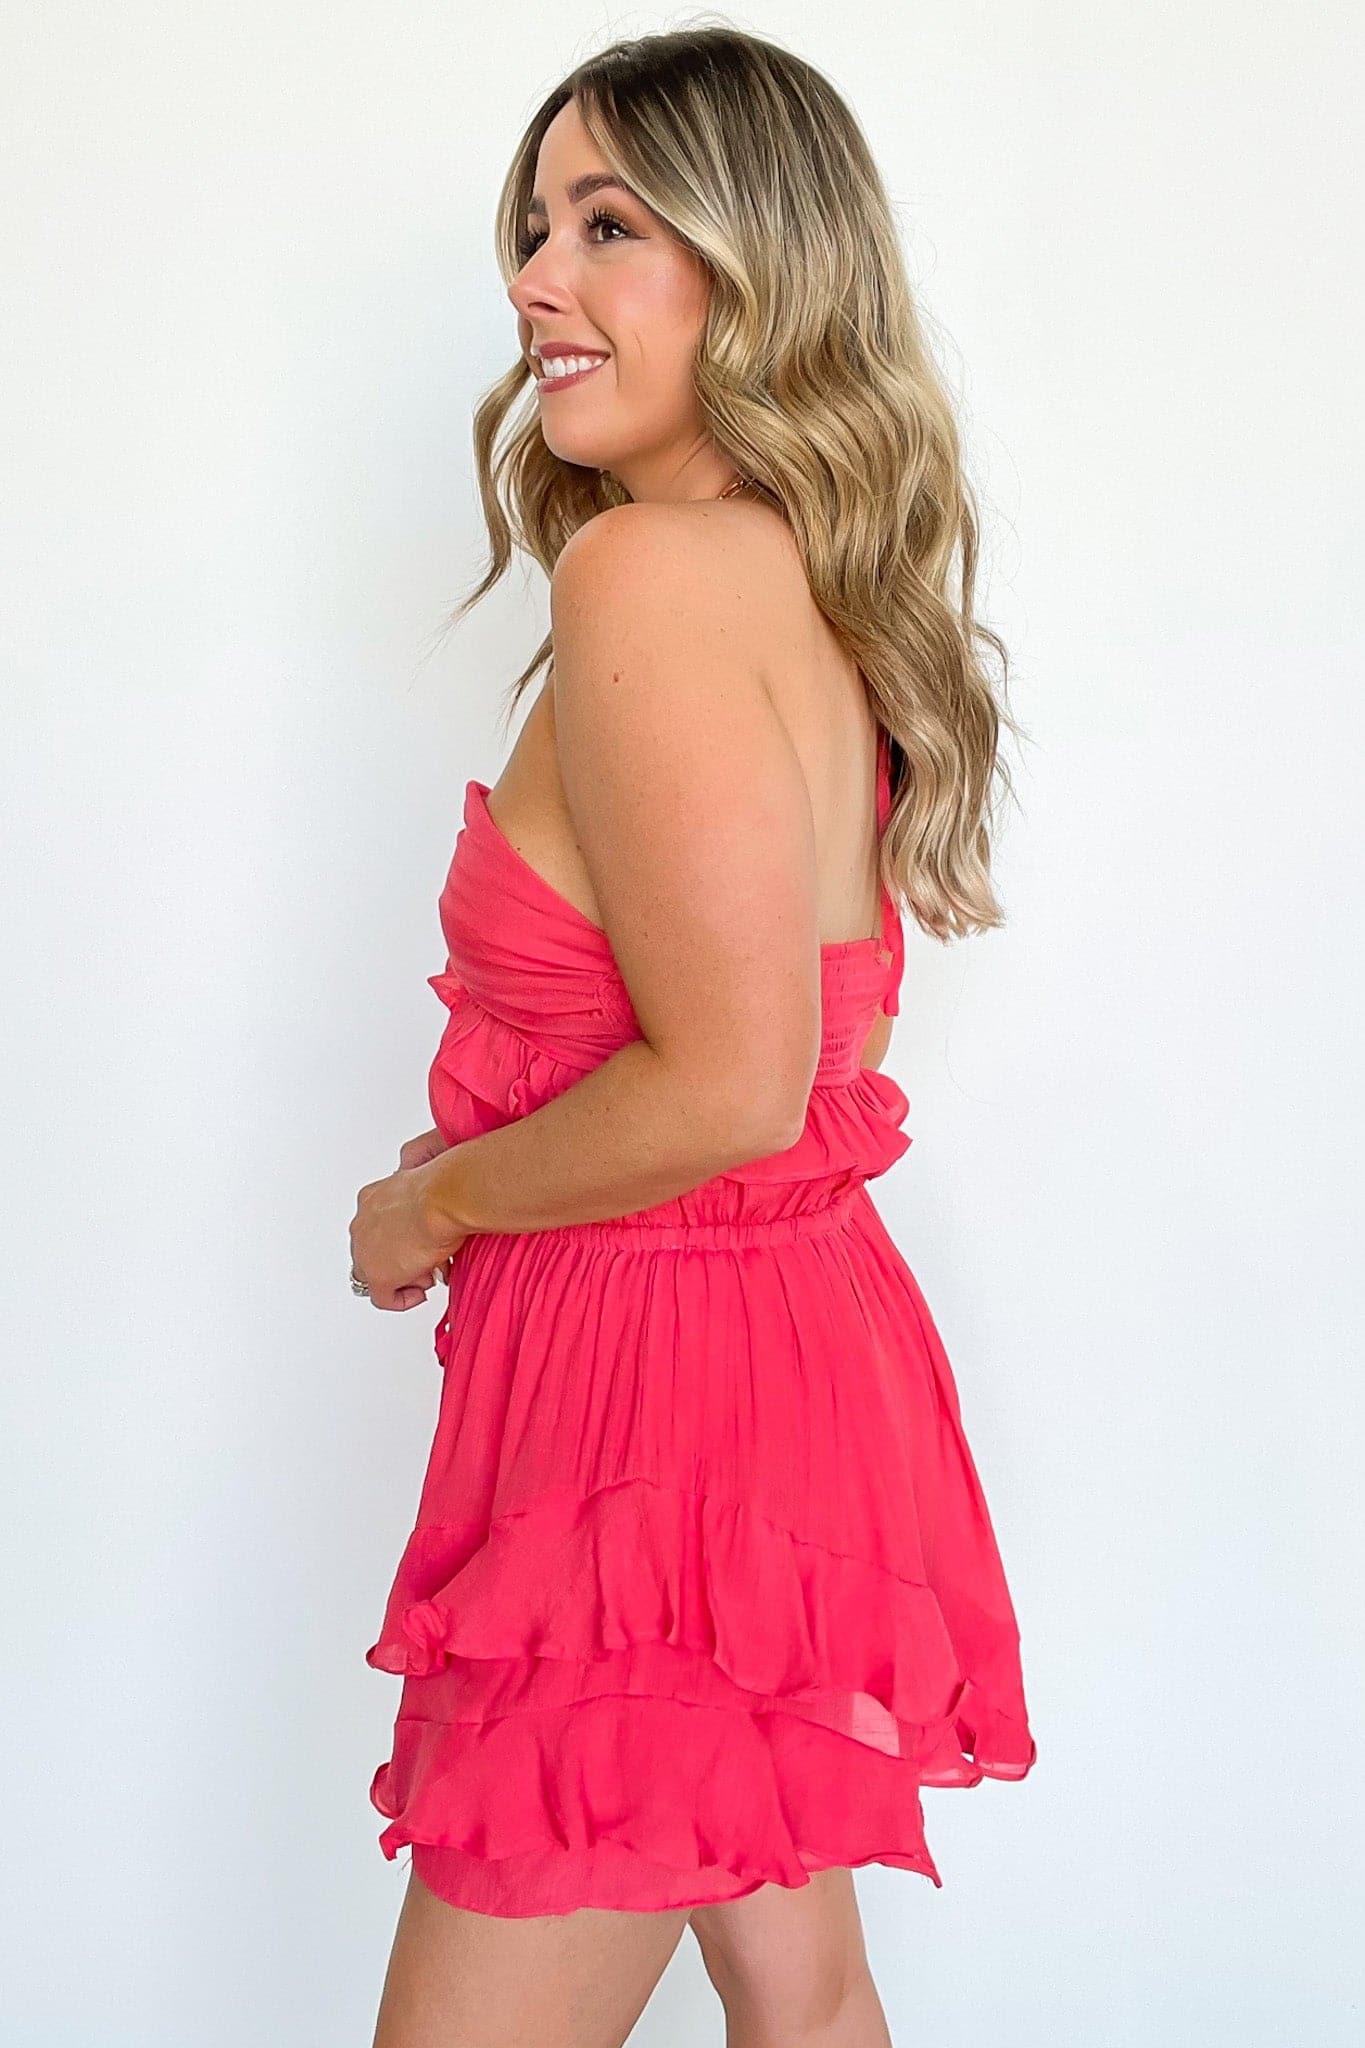  Elaborate Excellence V-Neck Halter Flounce Romper - FINAL SALE - Madison and Mallory